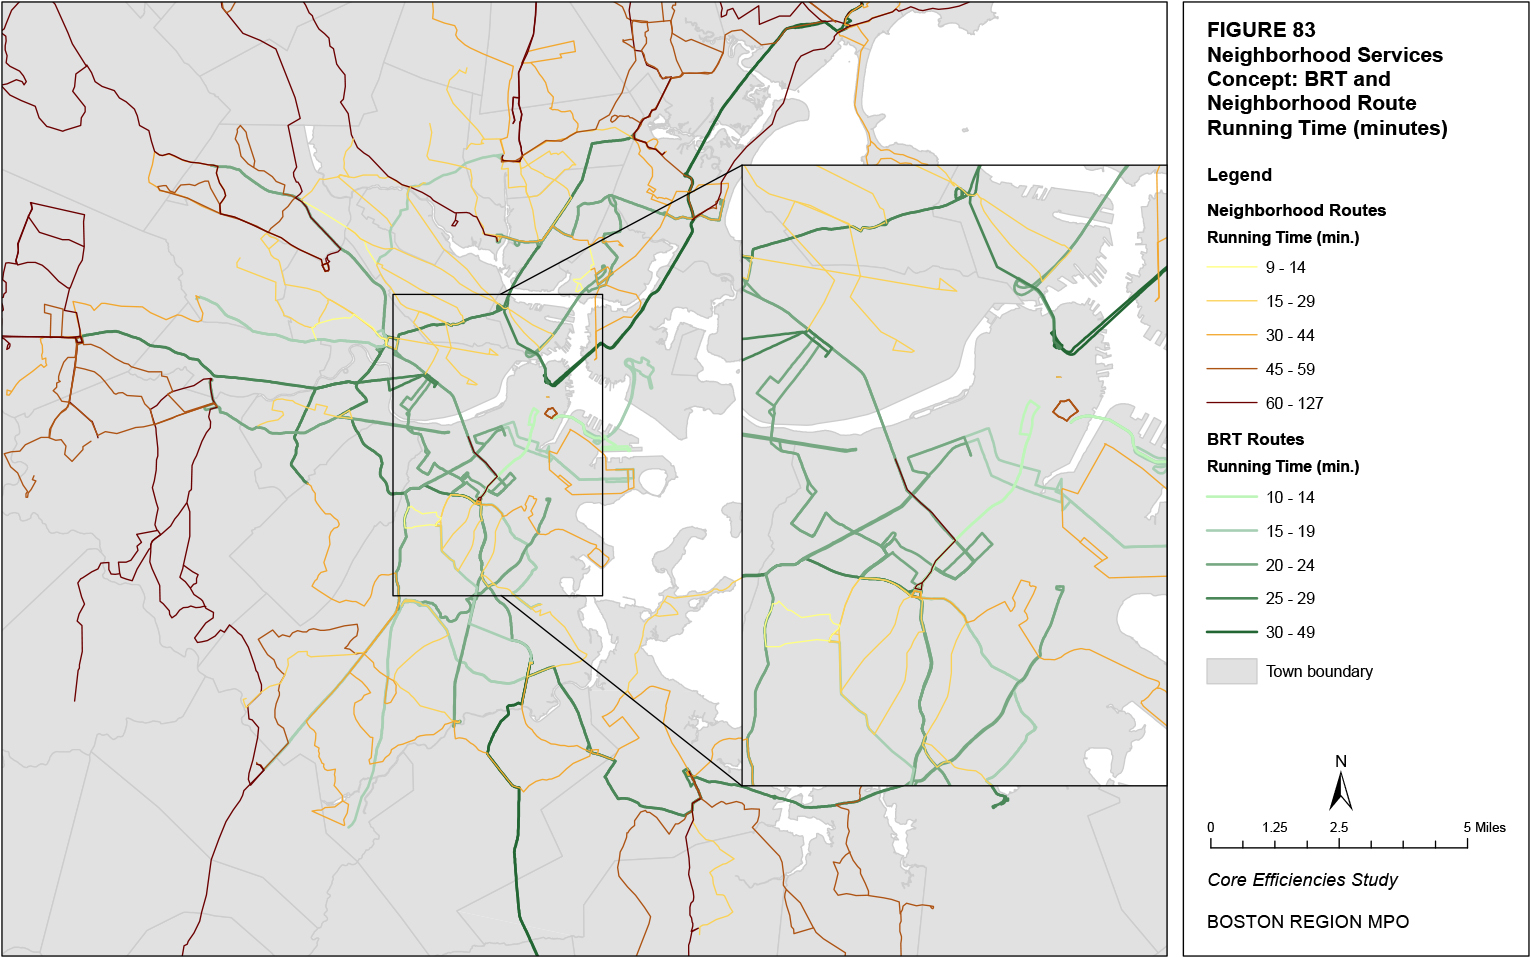 This map shows the estimated route running times of neighborhood and BRT routes.